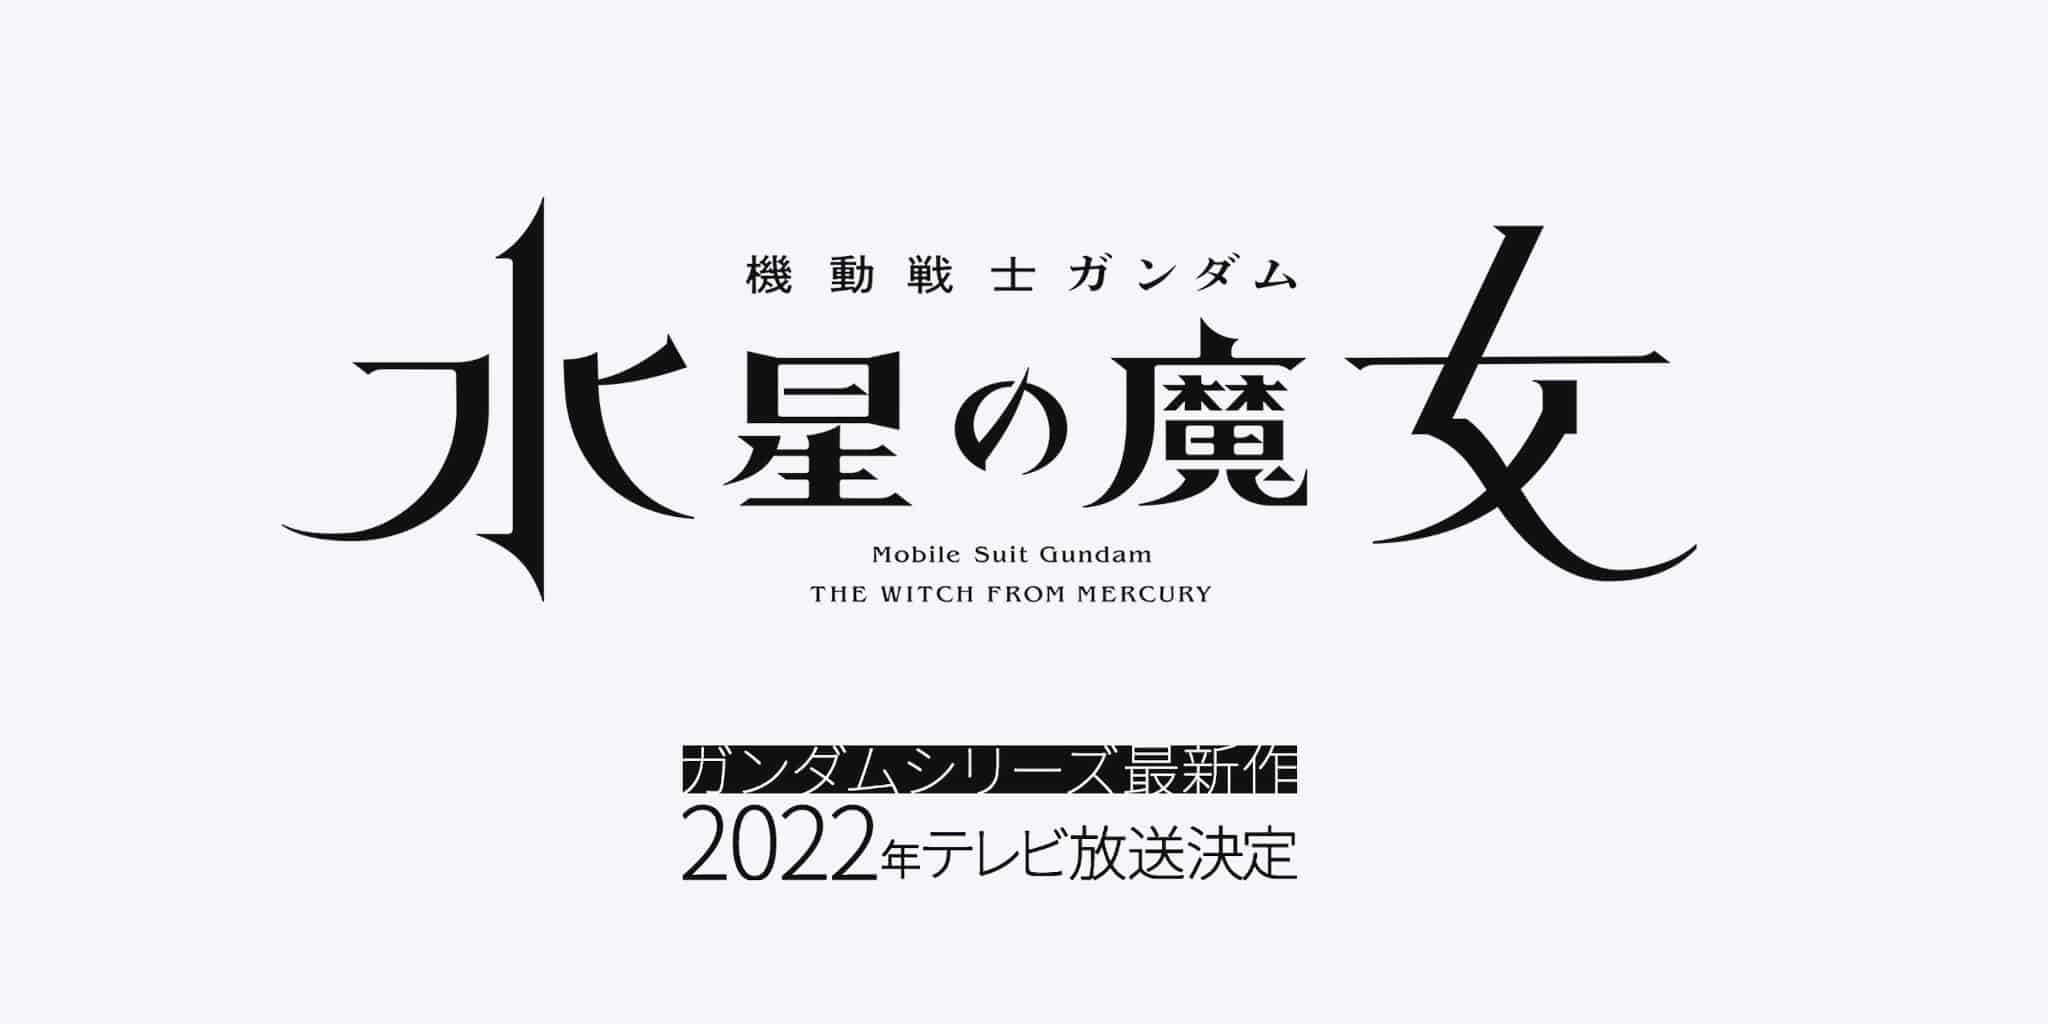 Annonce de anime Mobile Suit Gundam : The Witch from Mercury pour 2022